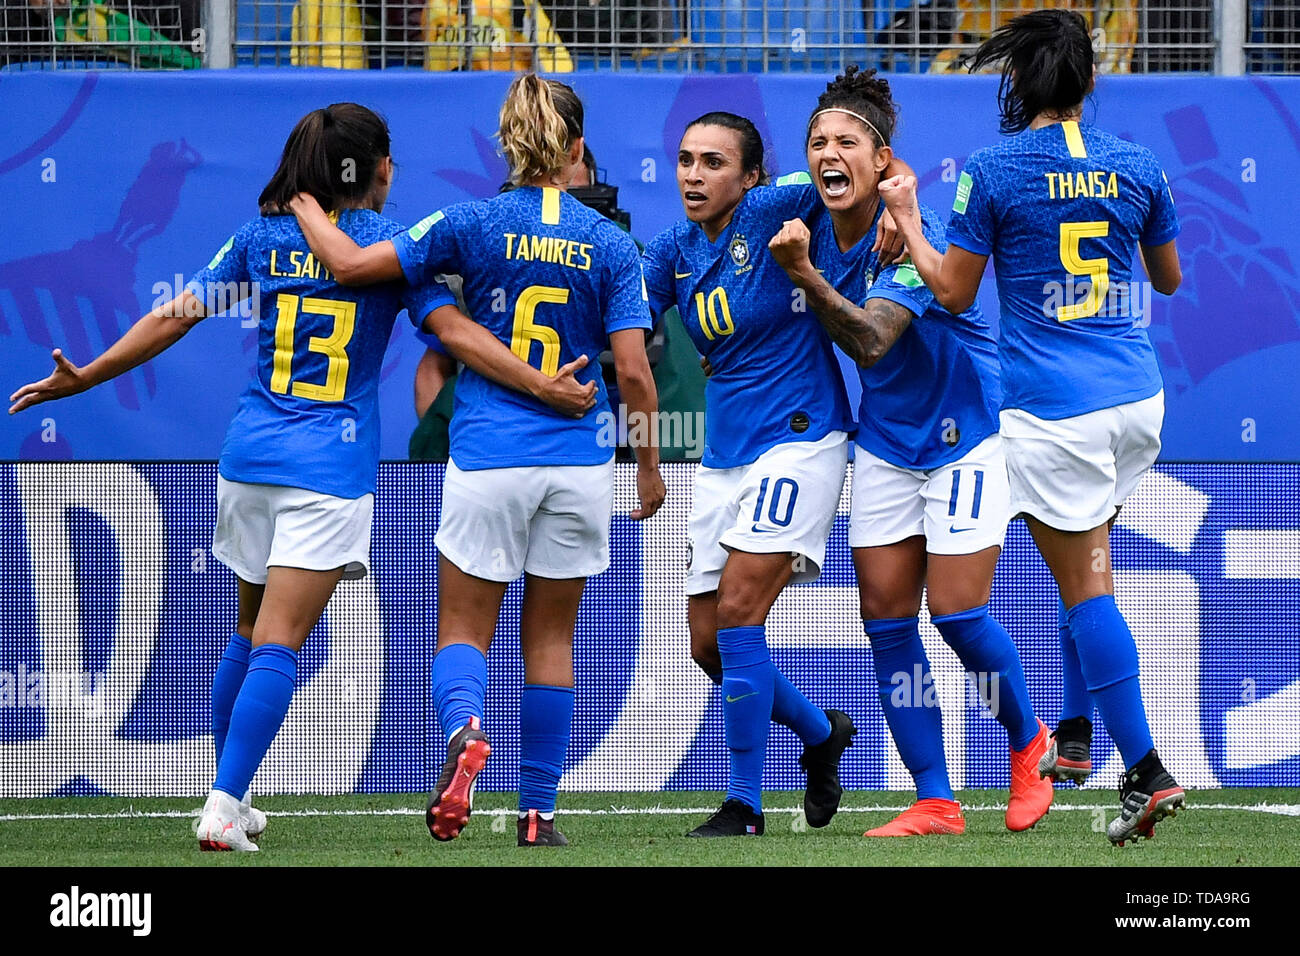 Montpellier, Tamires (2nd L) and Leticia Santos (1st L) during the group C match between Brazil and Australia at the 2019 FIFA Women's World Cup in Montpellier. 13th June, 2019. Cristiane (2nd R) of Brazil celebrates scoring with her teammates Thaisa (1st R), Marta (C), Tamires (2nd L) and Leticia Santos (1st L) during the group C match between Brazil and Australia at the 2019 FIFA Women's World Cup in Montpellier, France on June 13, 2019. Credit: Chen Yichen/Xinhua/Alamy Live News Stock Photo